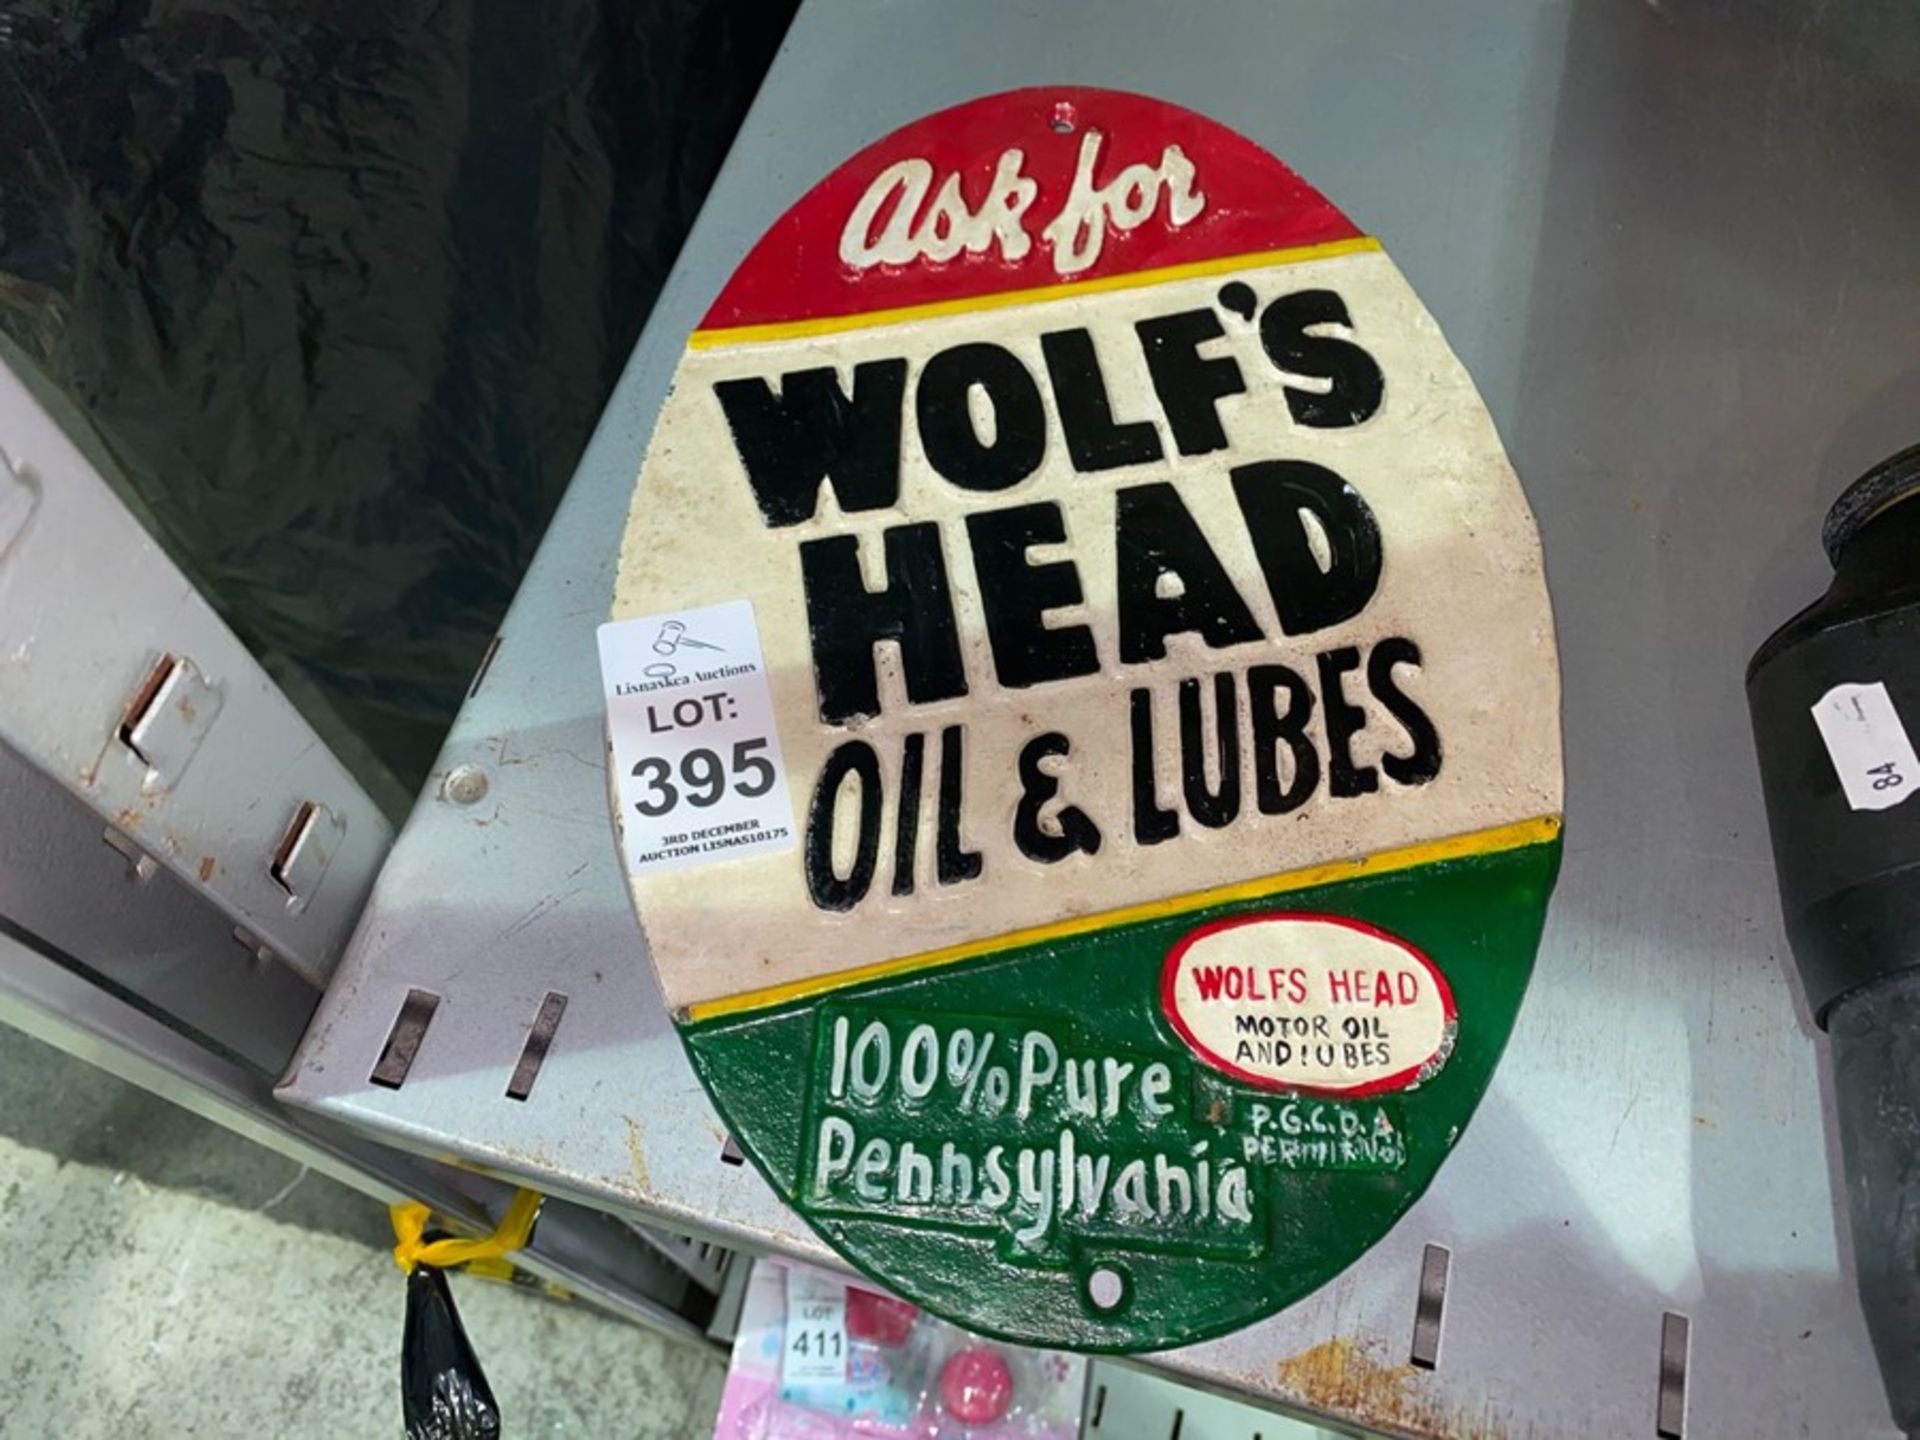 CAST IRON WOLF'S HEAD OIL & LUBES SIGN